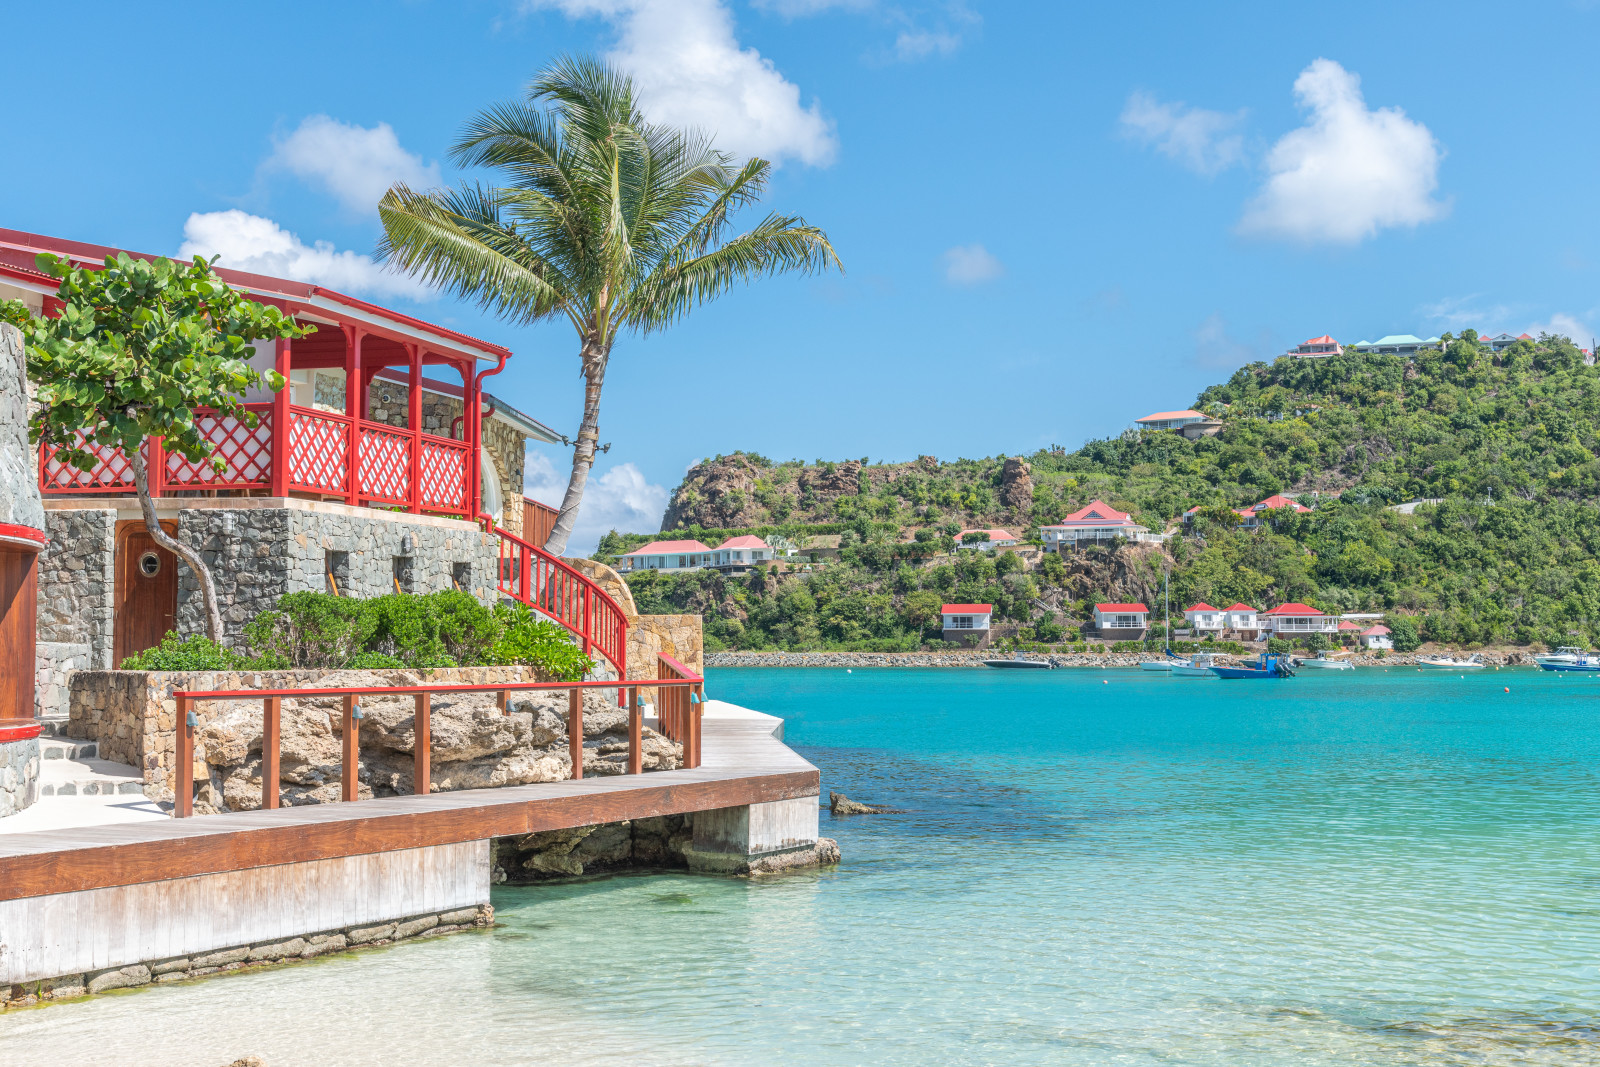 Dreamy 8-Day Guide to St. Barth's & Anguilla - Day 1: Arrive in St Barth's